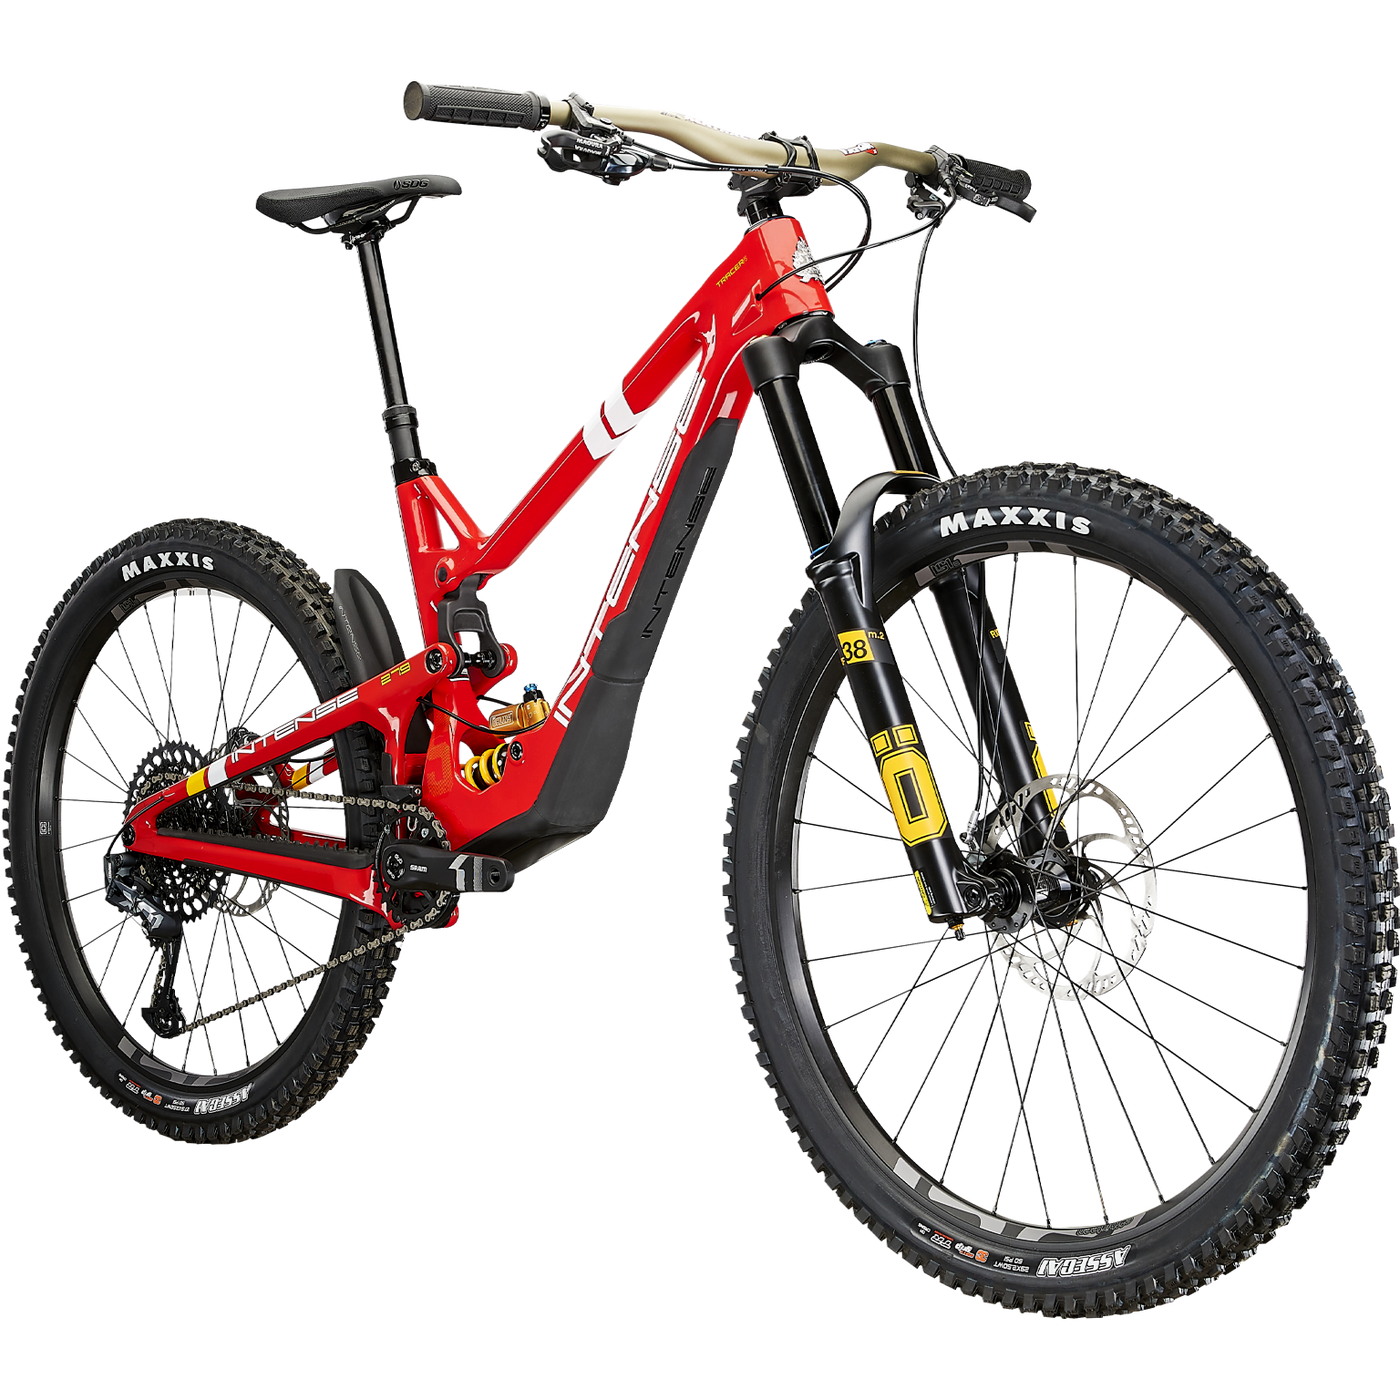 Shop discounted mountain bikes online for the INTENSE Tracer S Carbon Enduro Mountain Bike for sale online or at authorized dealers